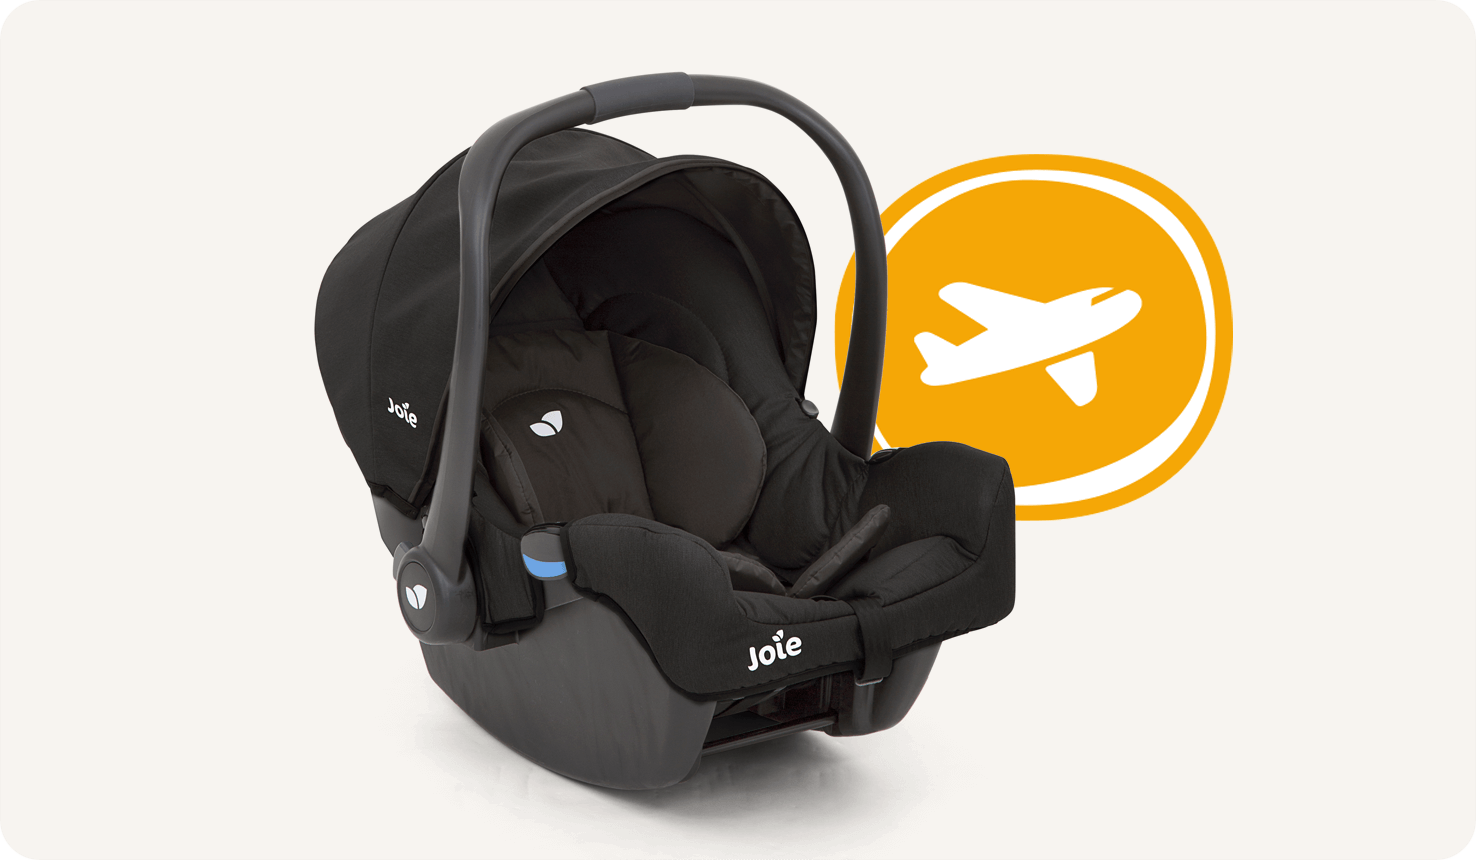 Right angle view of Joie gemm baby car seat in black with an icon of an airplane beside it.